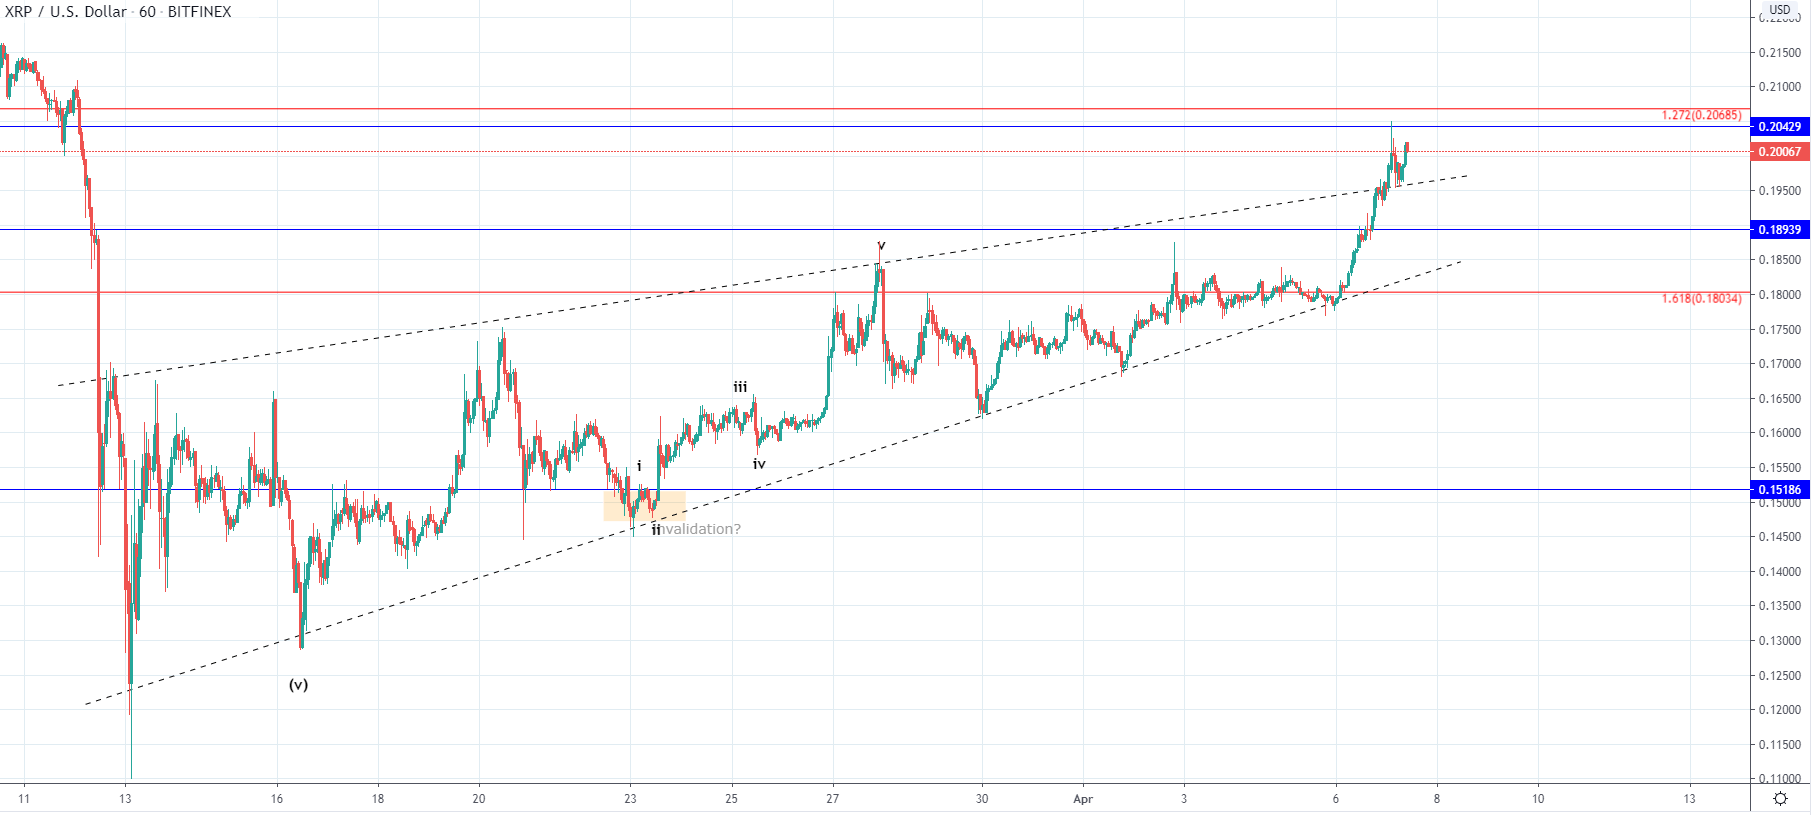 BTC and XRP - Increase Seen But Resistance Close